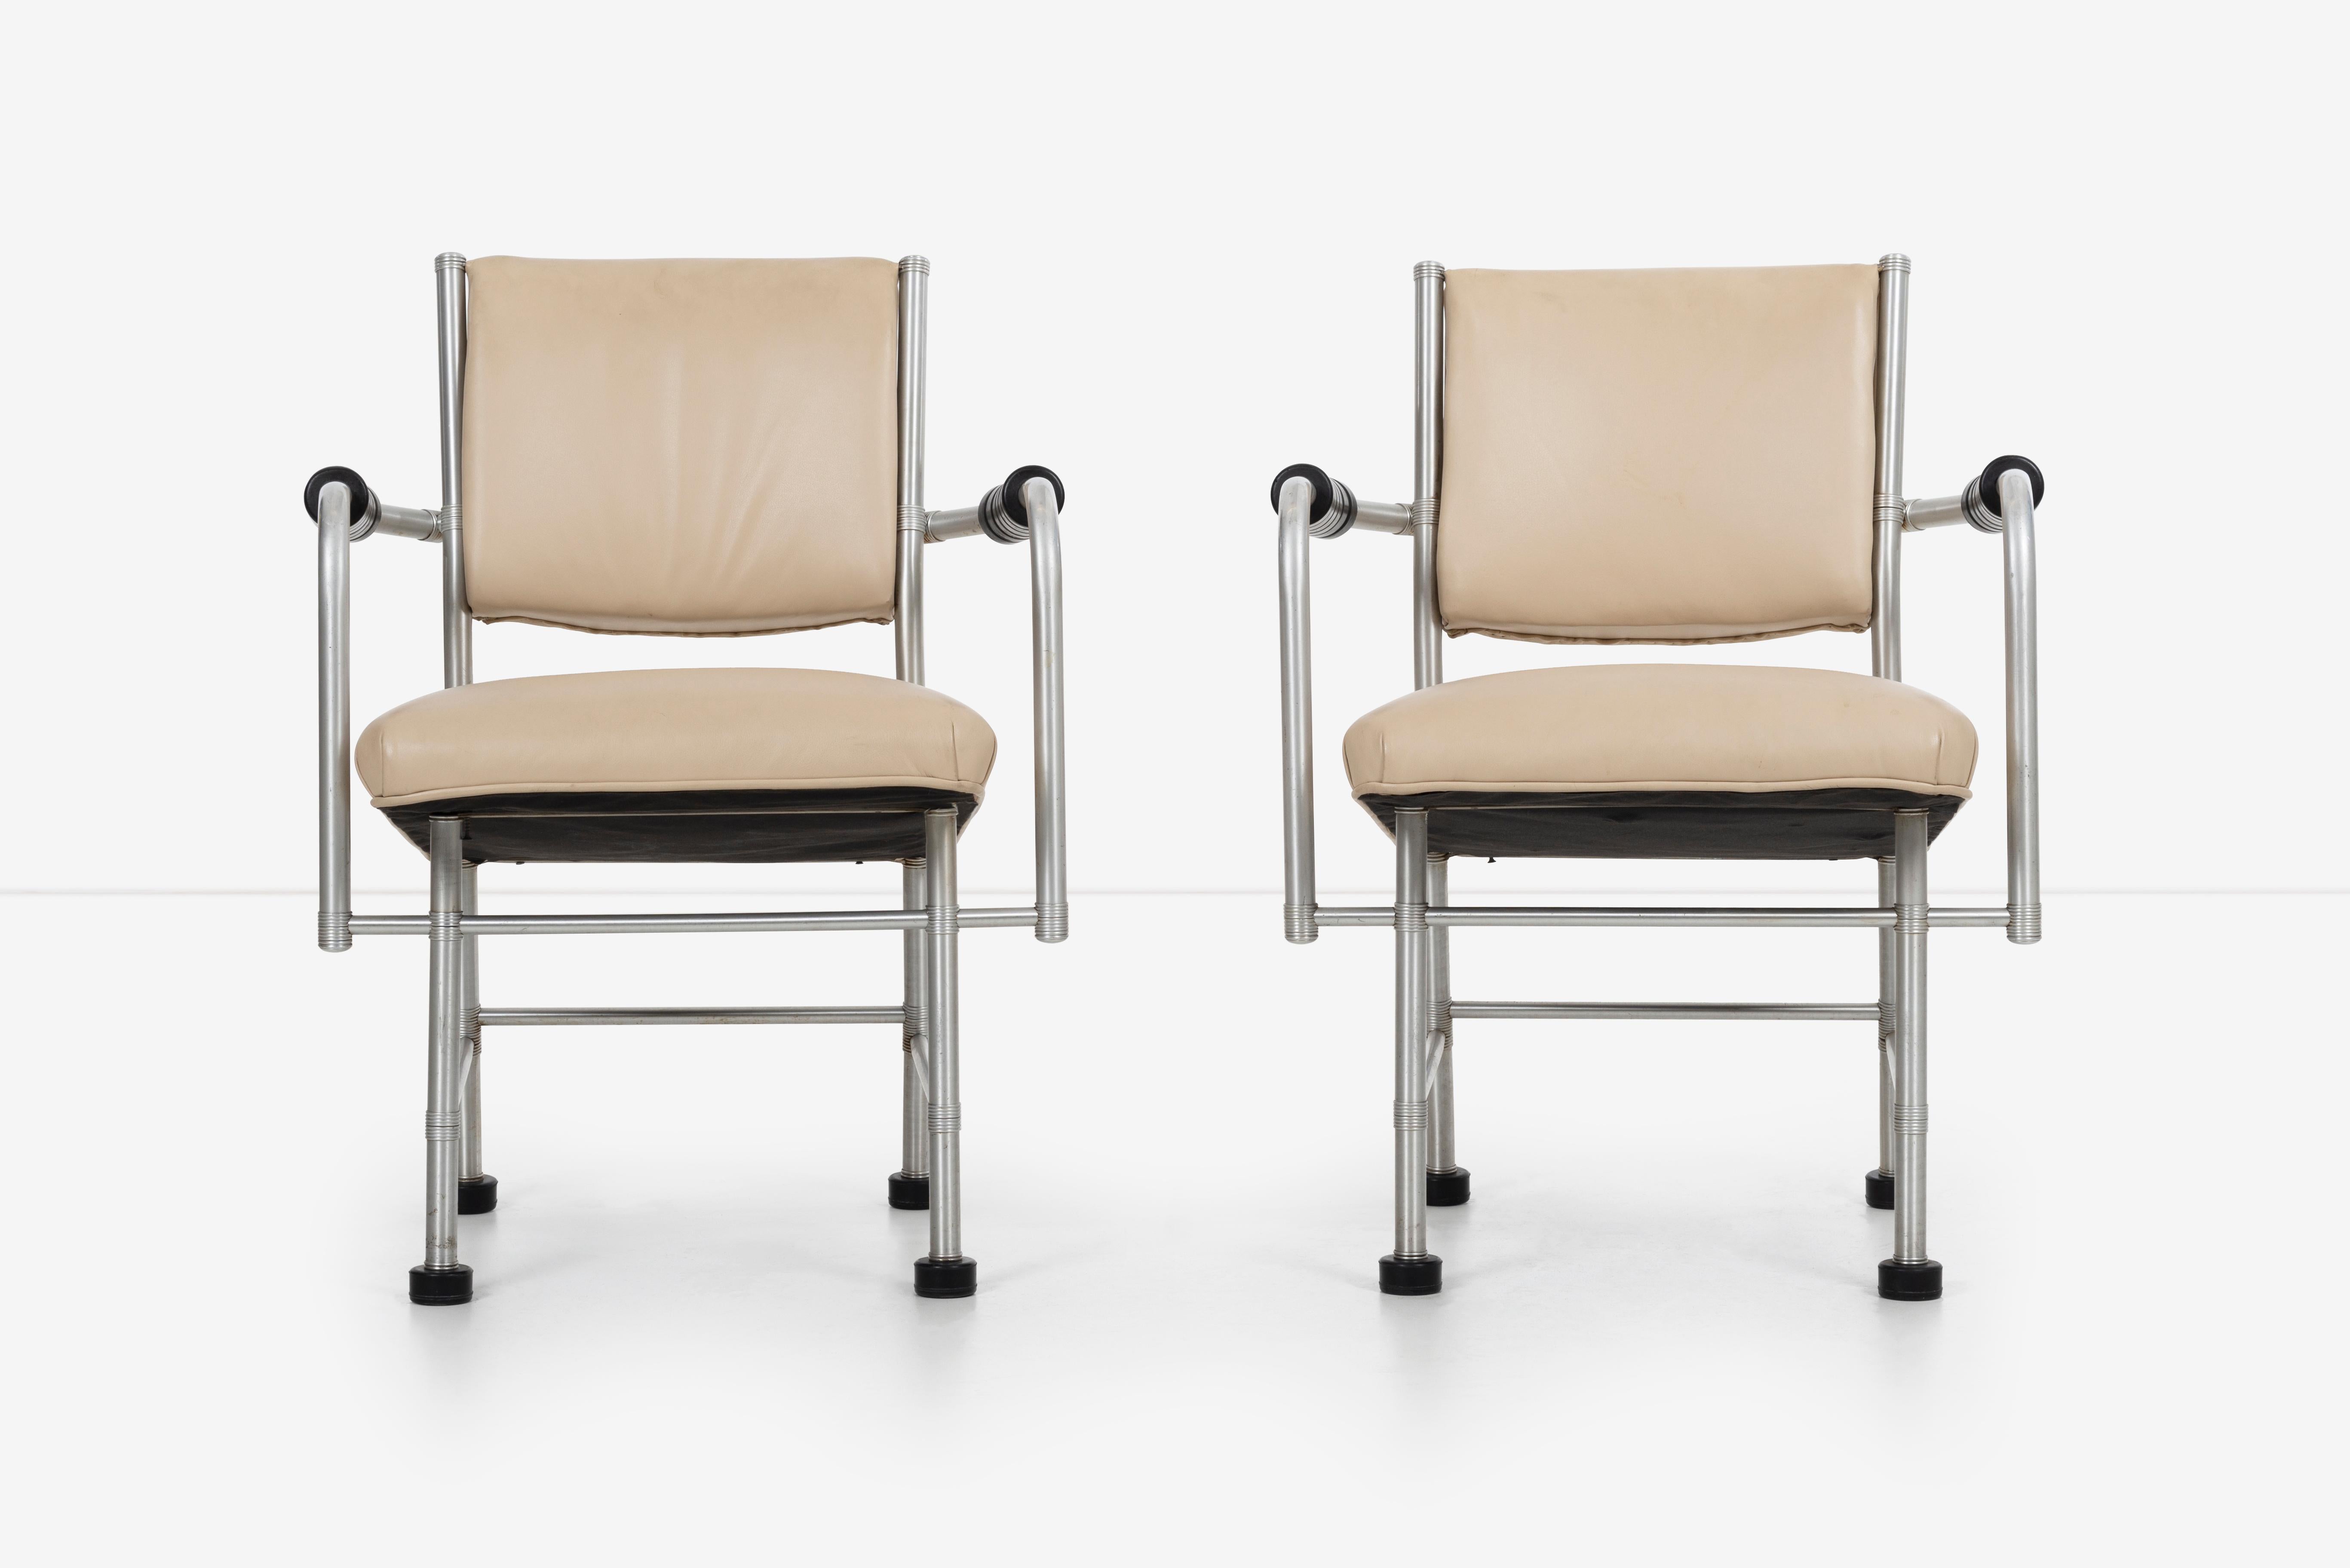 Warren McArthur pair of chairs a Revision of Sardi's chair, a collaboration with Rudolph Schindler. 
Model #1251 AR manufactured in Rome, New York in the 1930s
McArthur incorporated rubber foot pads as arm rests.
 